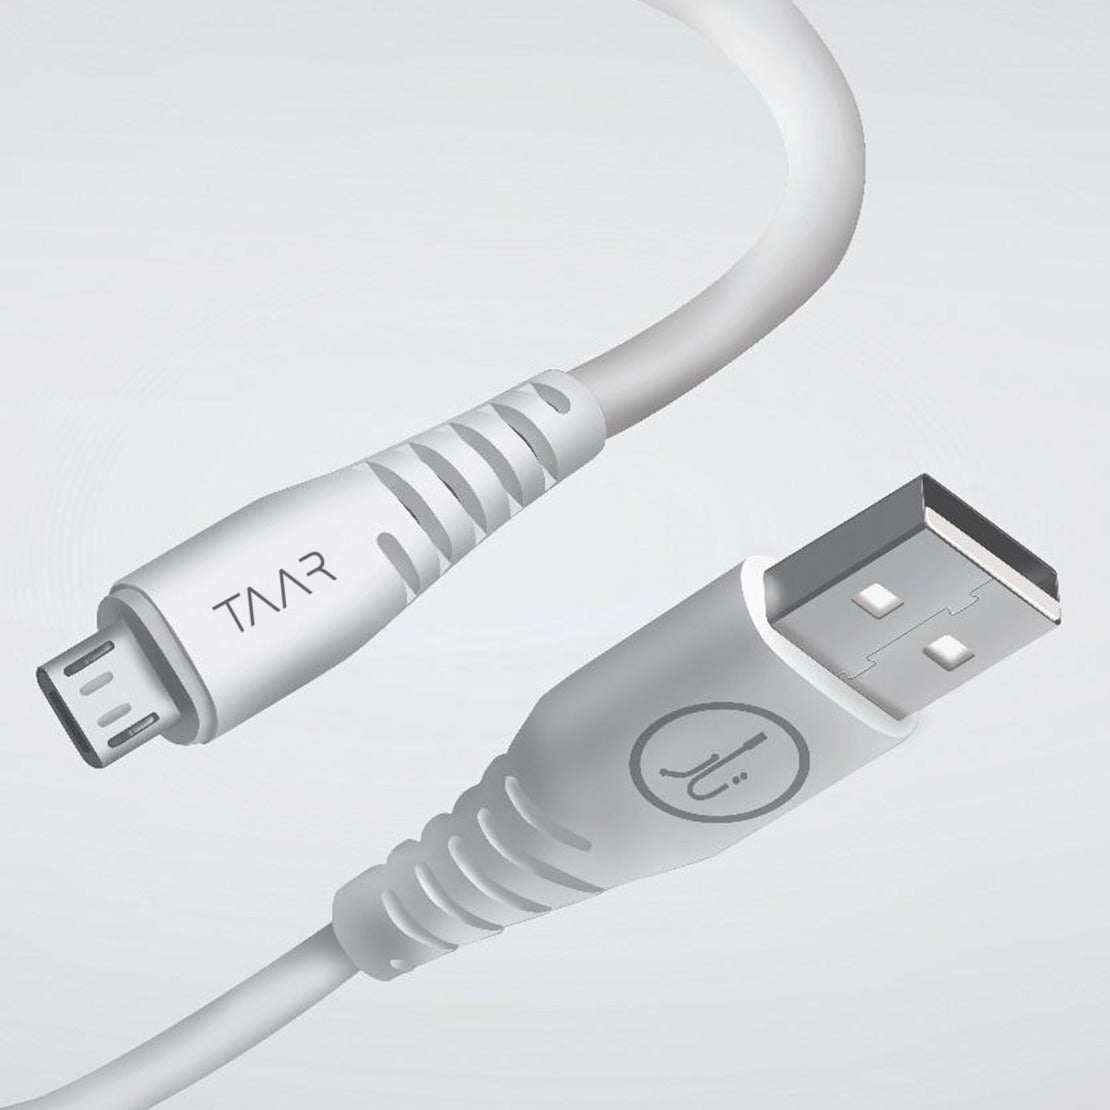 Taar Surge Charging Cable Micro Price in Pakistan